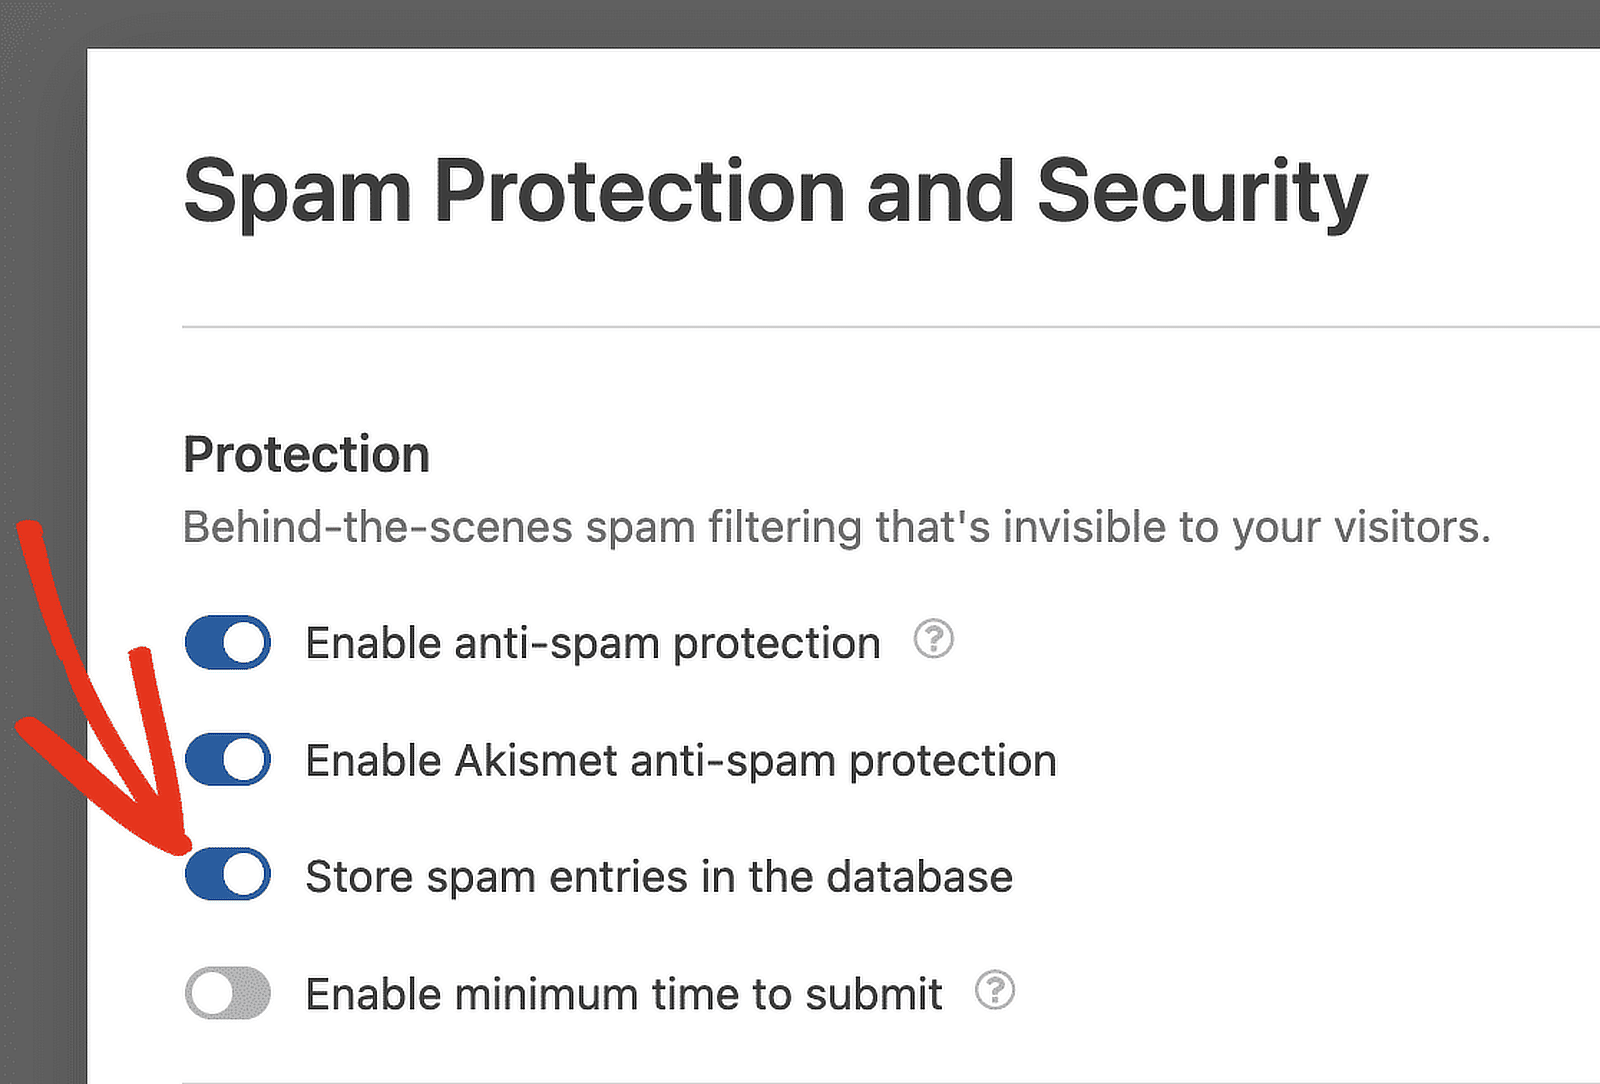 enable storing spam entries